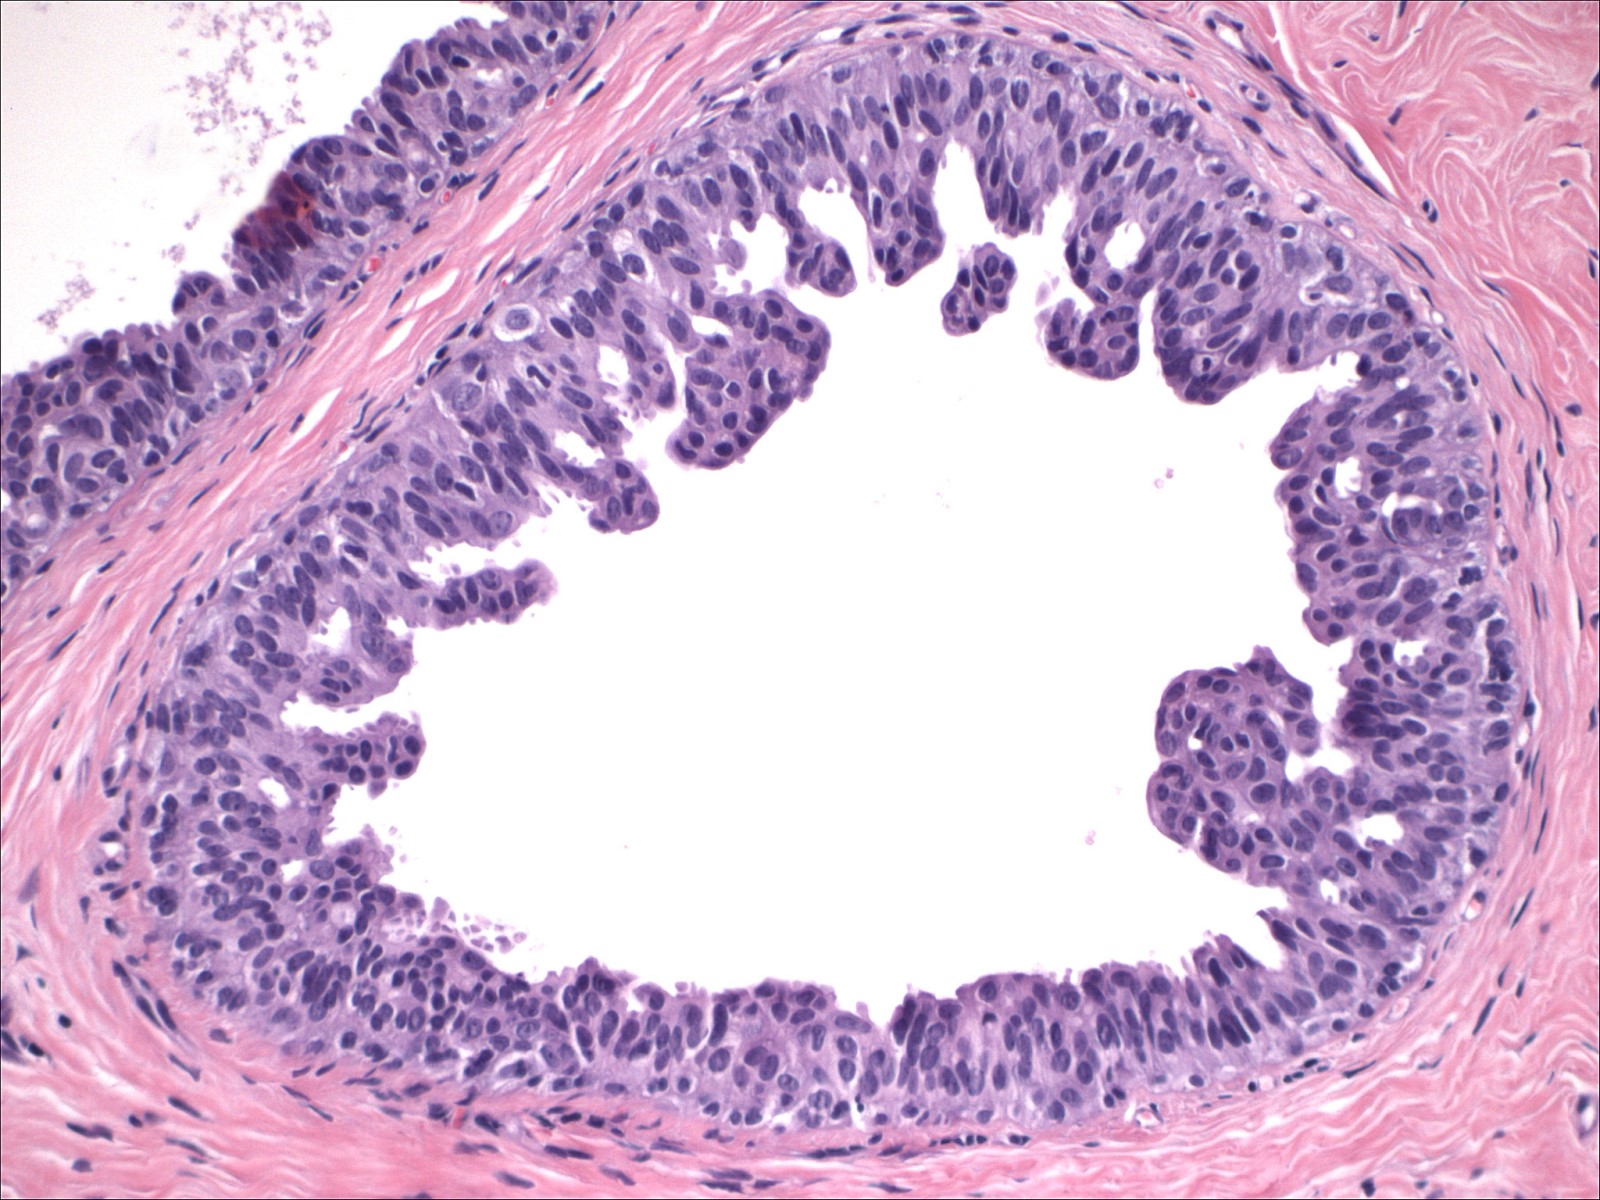 intraductal papilloma with florid usual ductal hyperplasia)